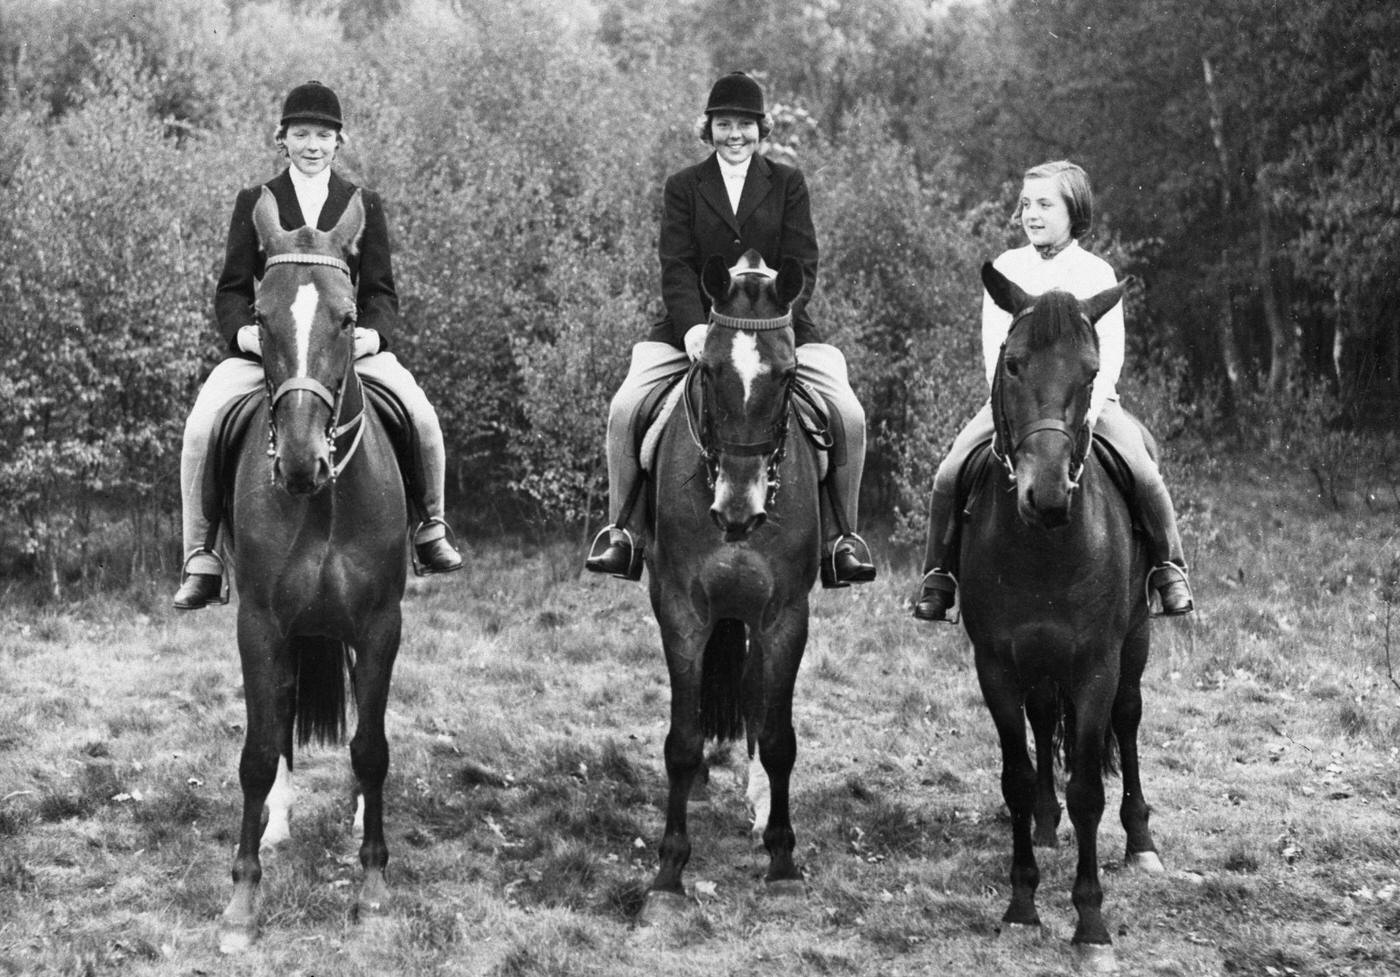 Dutch Royal Family: Princess Irene (14), Princess Beatrix (16), and Princess Margriet (11) ride horses at Grebbeberg, the Netherlands, daughters of Queen Juliana and Prince Bernhard of the Netherlands.